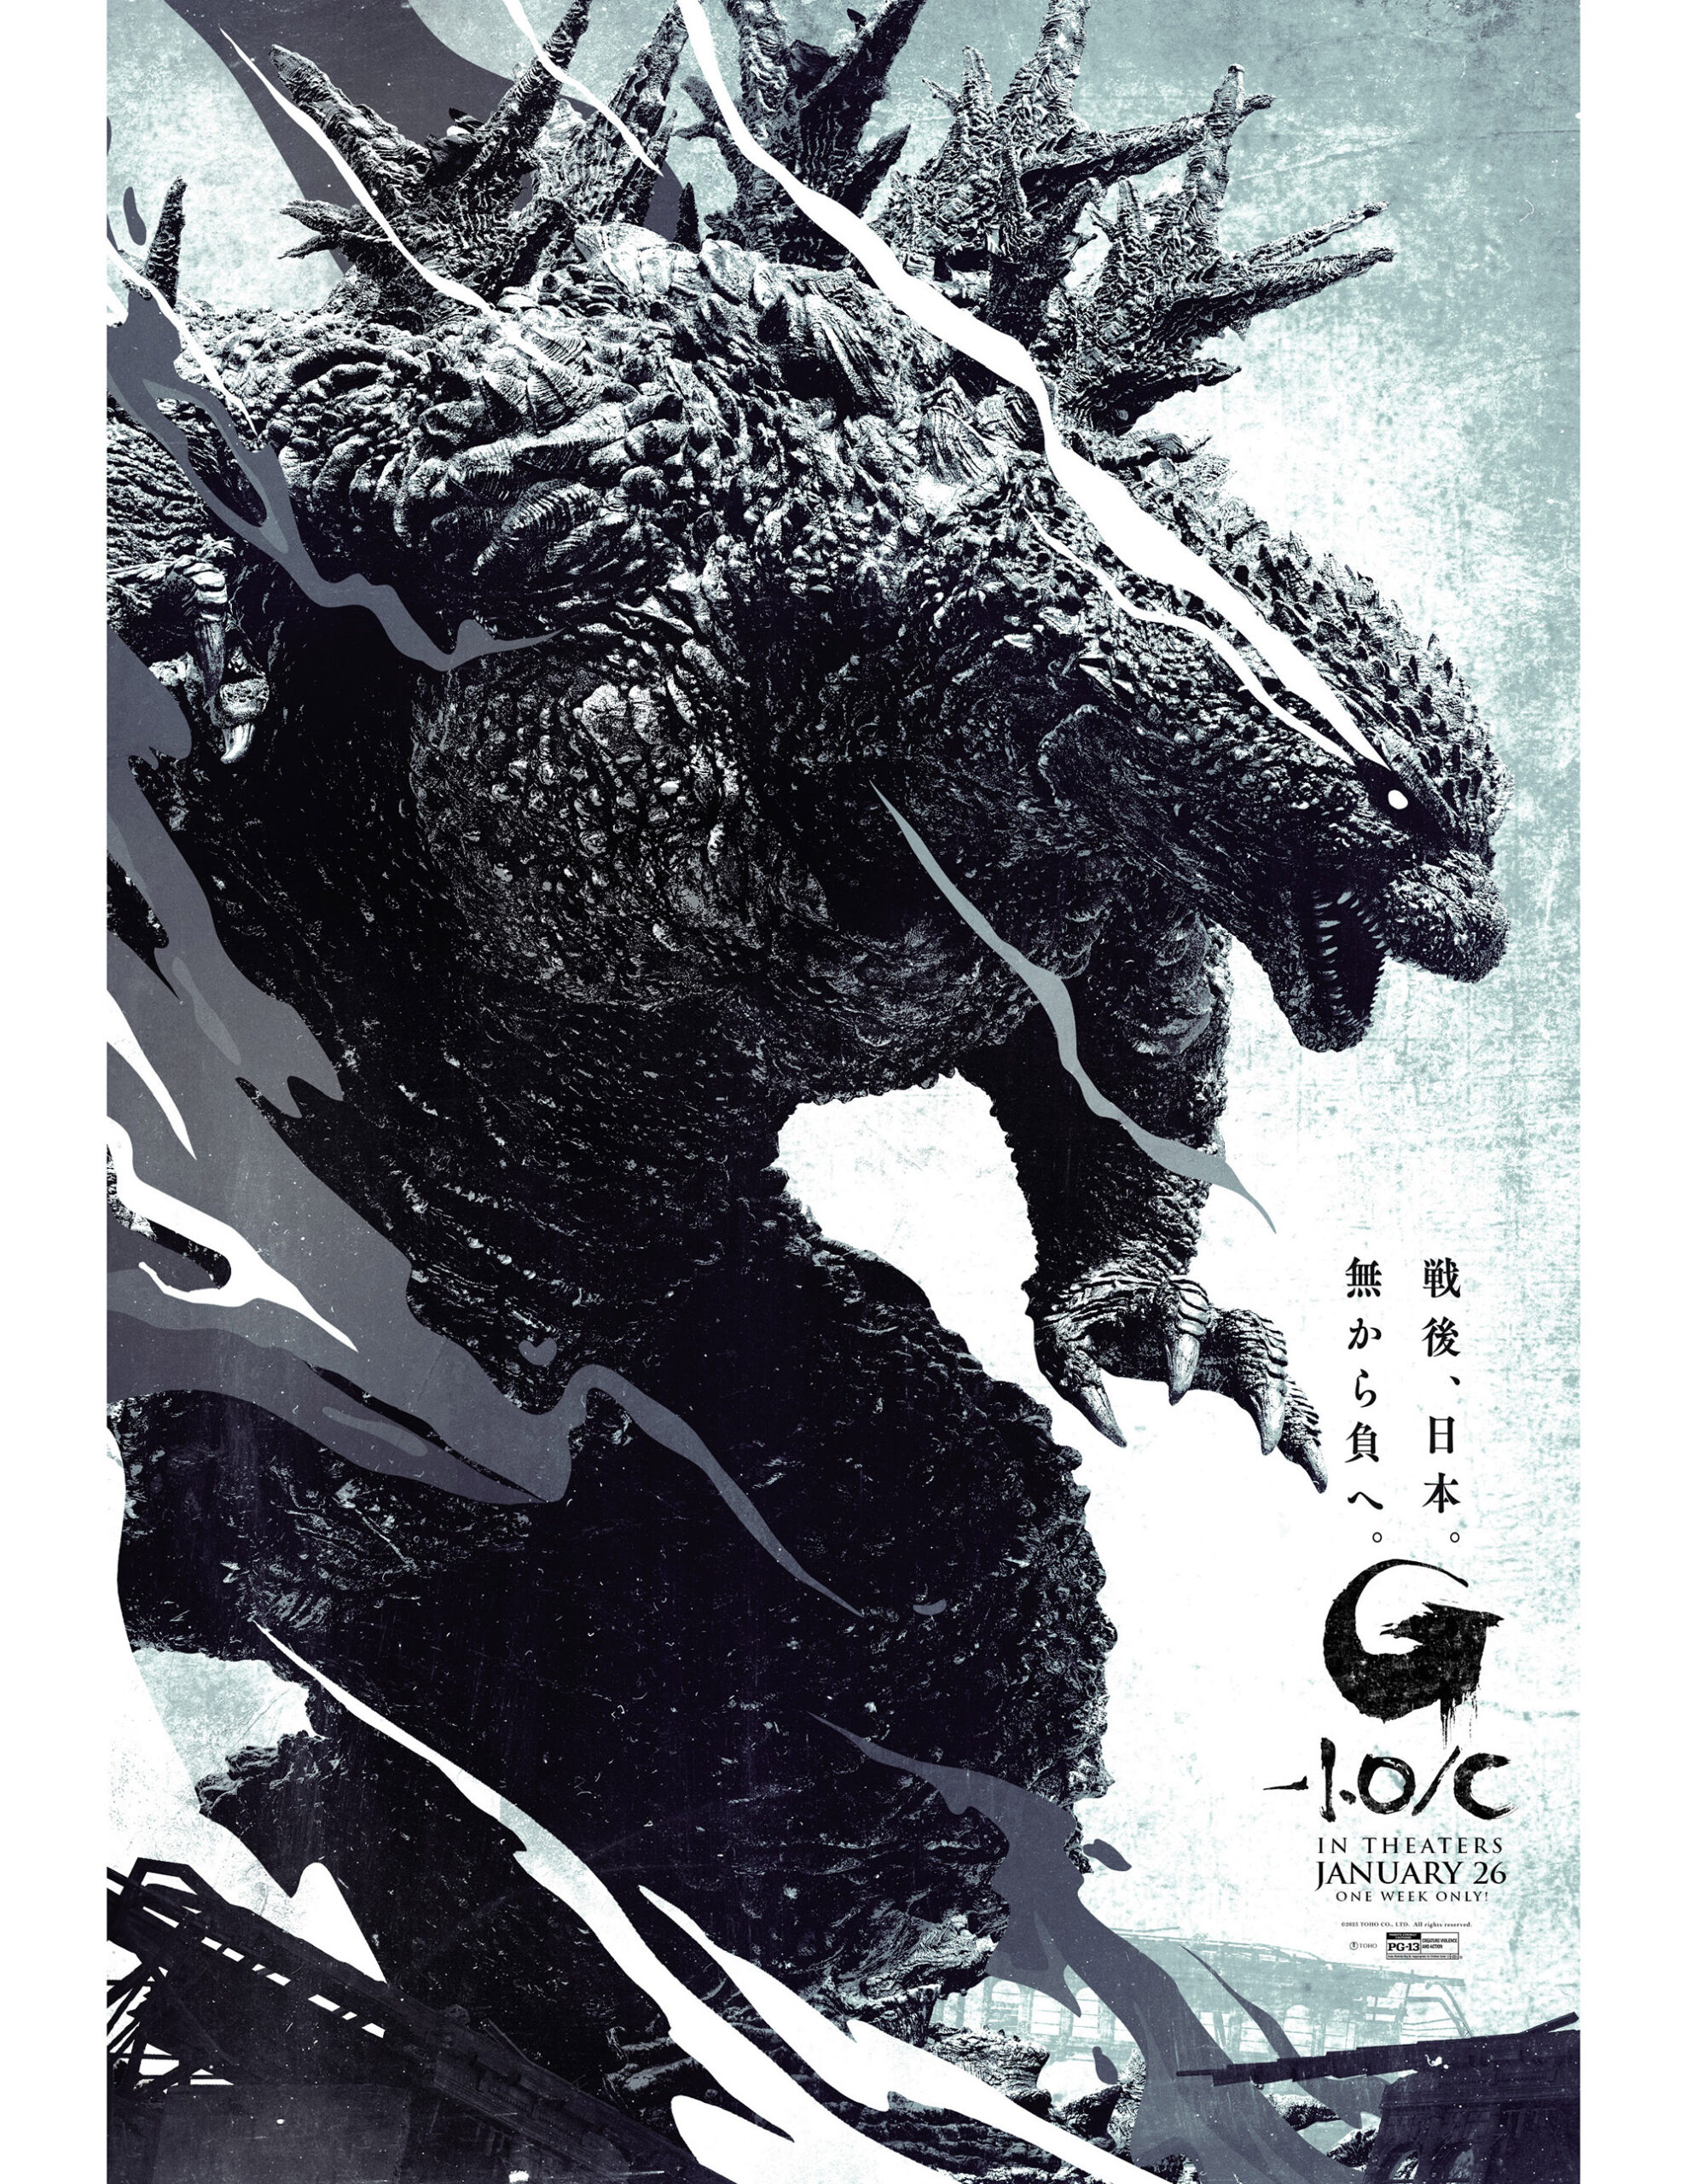 poster for the U.S. release of the Japanese movie "Godzilla Minus One Minus Color," a black-and-white version of "Godzilla MInus One." The vertical poster is taken up almost completely by an enormous black-and-white, anime-like image of Godzilla, who is leaning forward from the left side of the picture toward the bottom right with an enraged expression. A bit below his mouth are some Japanese characters, and below those is a big "G-1.0/C" logo, below which reads "In Theaters January 26 One Week Only!" Below that is a box indicating the film's PG-13 rating